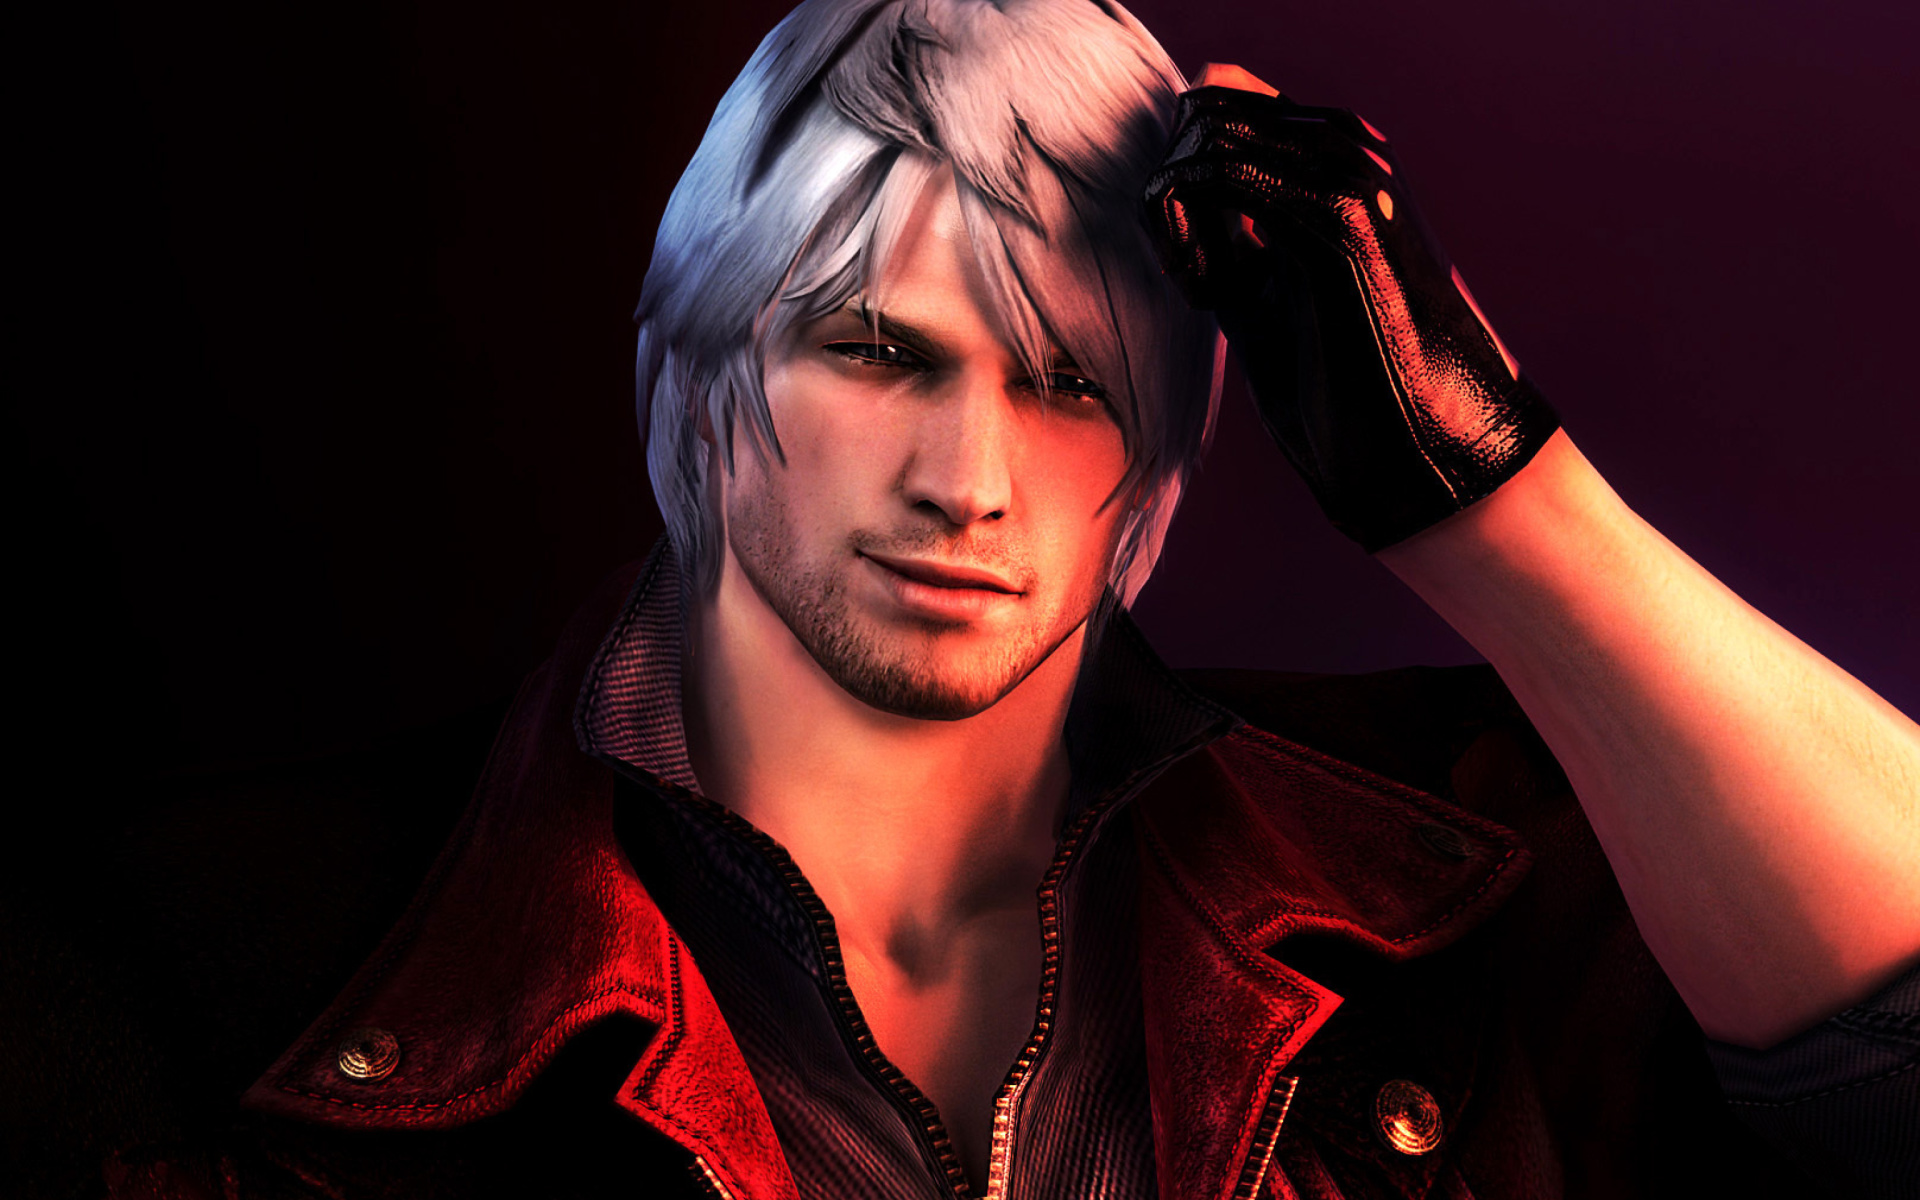 Devil May Cry Wallpapers for Widescreen Desktop PC 1920x1080 Full HD